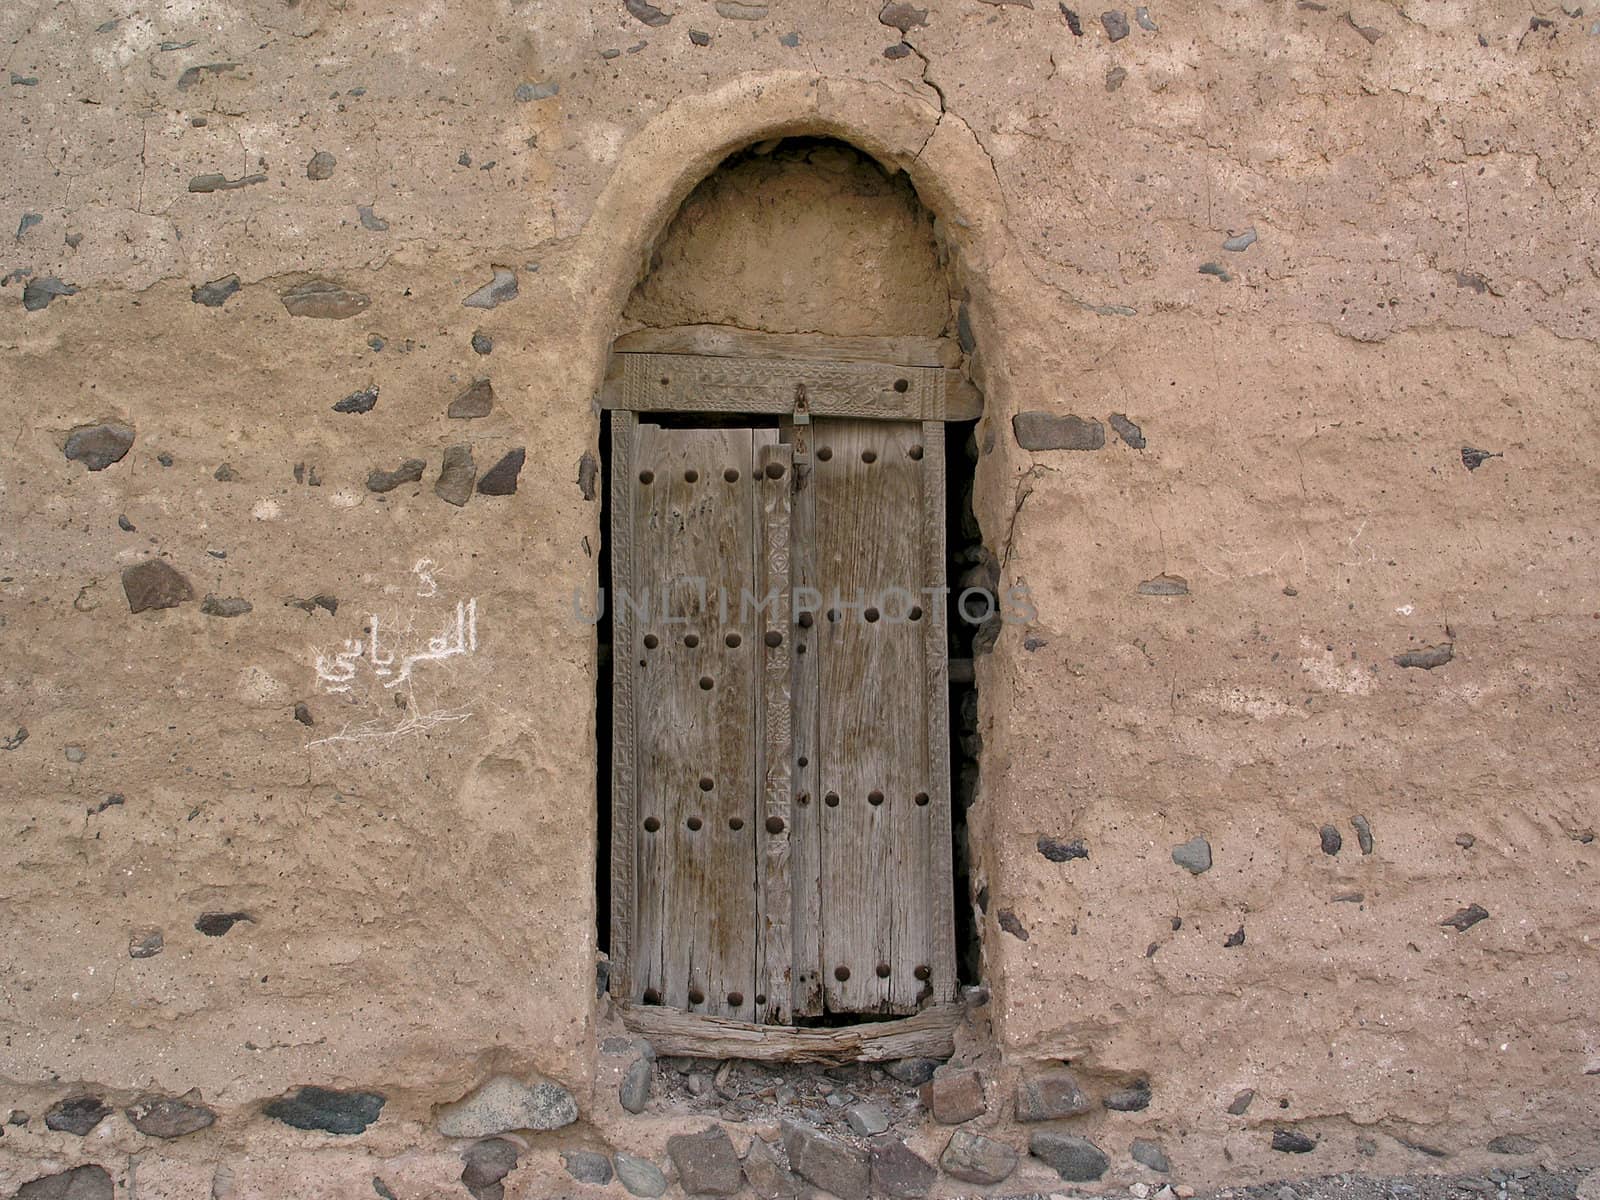 The door of the old fort at Al Naslah, United Arab Emirates.